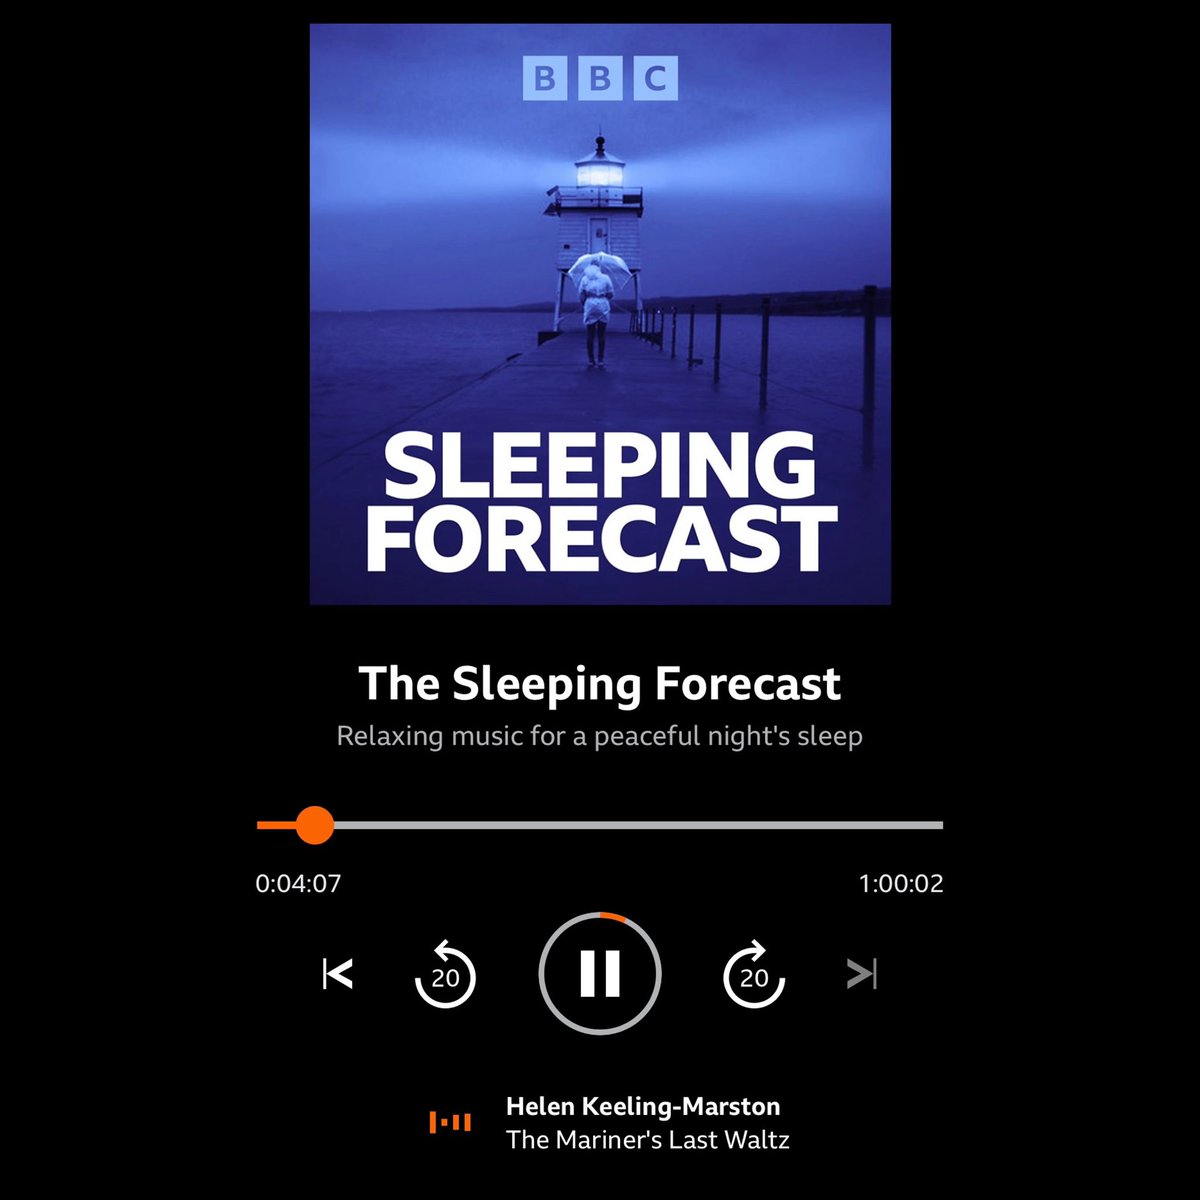 Lovely to have my latest track, The Mariner’s Last Waltz, on the latest BBC Sleeping Forecast: bbc.co.uk/sounds/play/p0… Many thanks, @BBCSounds @bbcintroducing 🎶🎵🎶🎵🎶